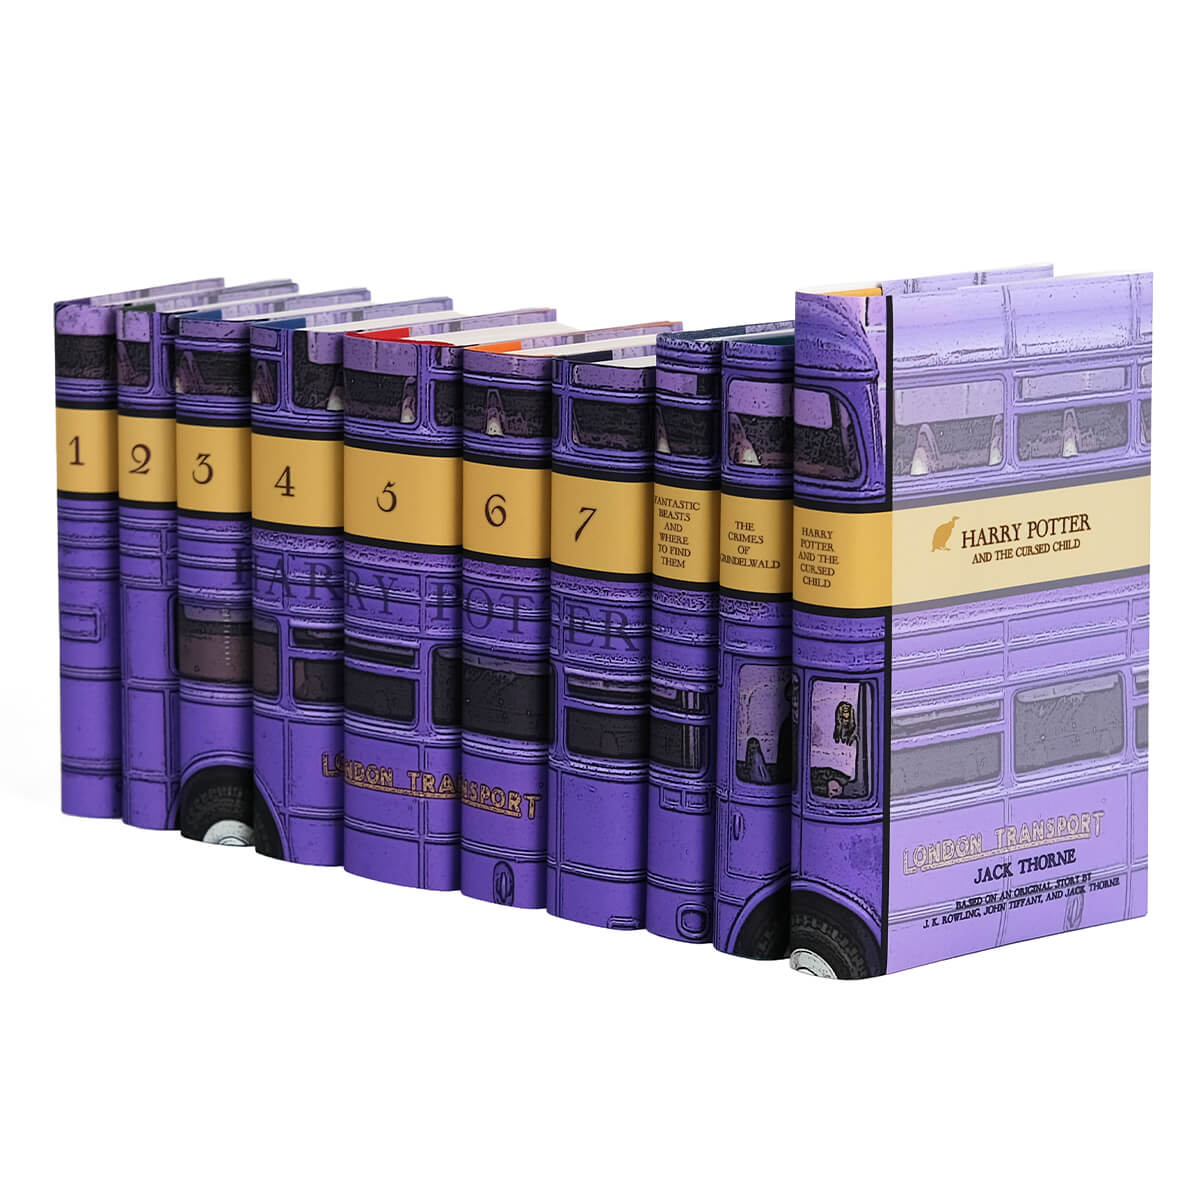 Angle shot of UK Harry Potter Bus set. Spines form a purple London Bus and numbered spines. Front cover features book titles and author along with a symbol from each book.